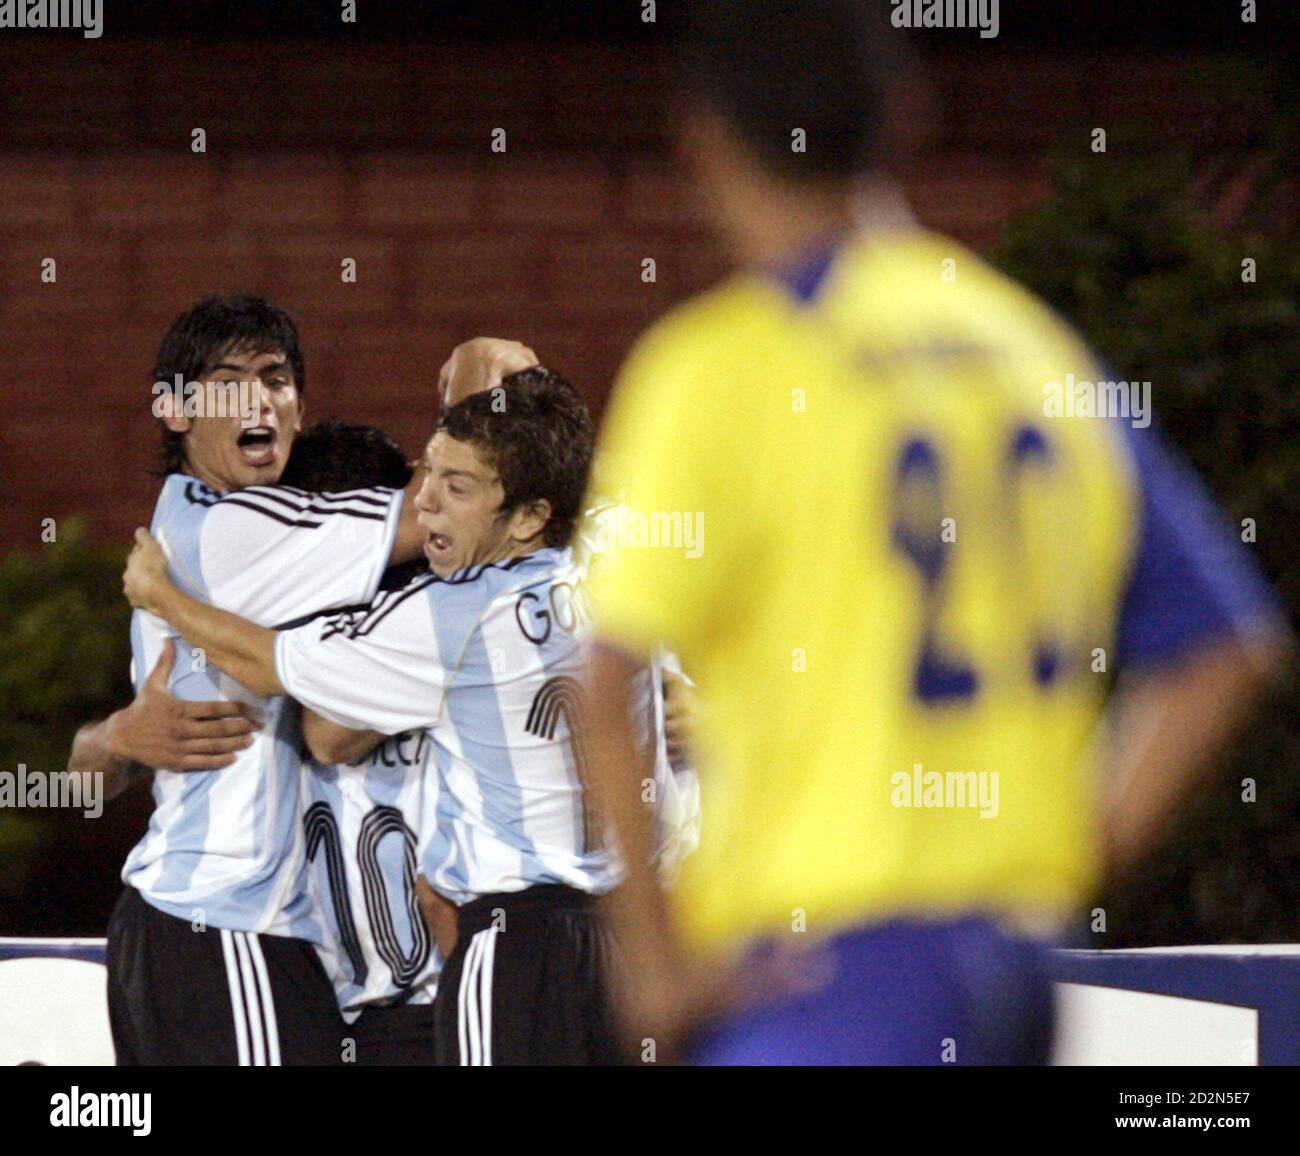 Argentina's Ever Banega (L), Maximiliano Moralez (10) and Alejandro Gomez  (R) embrace team mate Gonzalo Aban after he scored a goal, while Ecuador's  Victor Valarezo (front) watches, during their Group B soccer